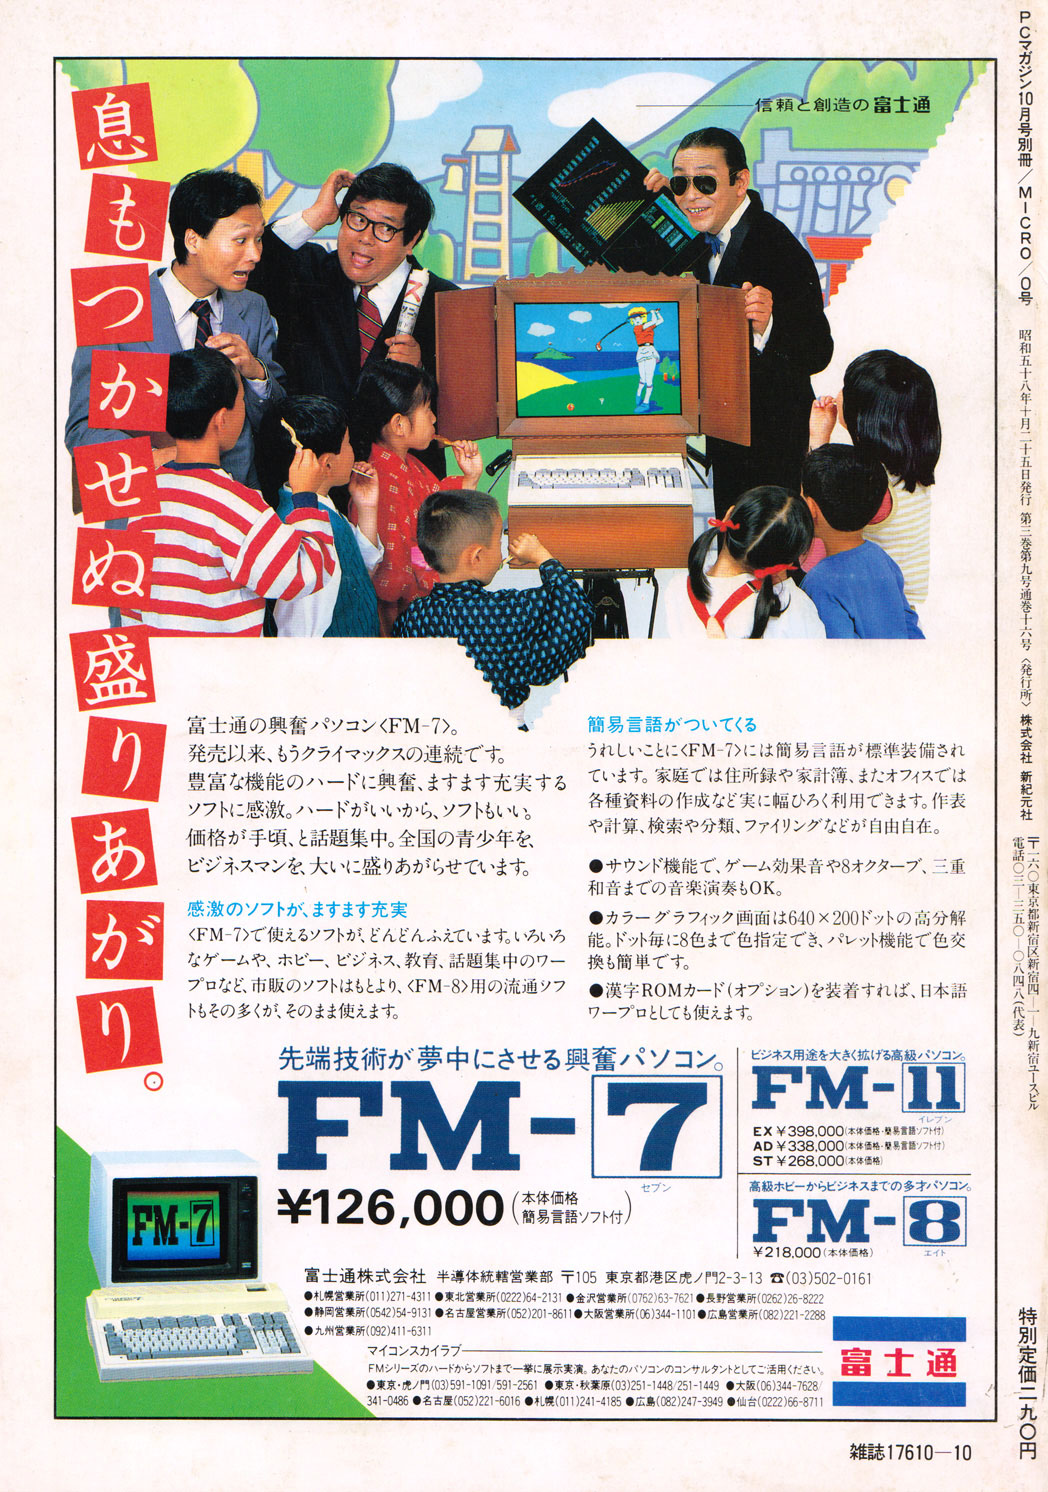 Technical Specifications Fujitsu Fm 7 The Video Games Museum